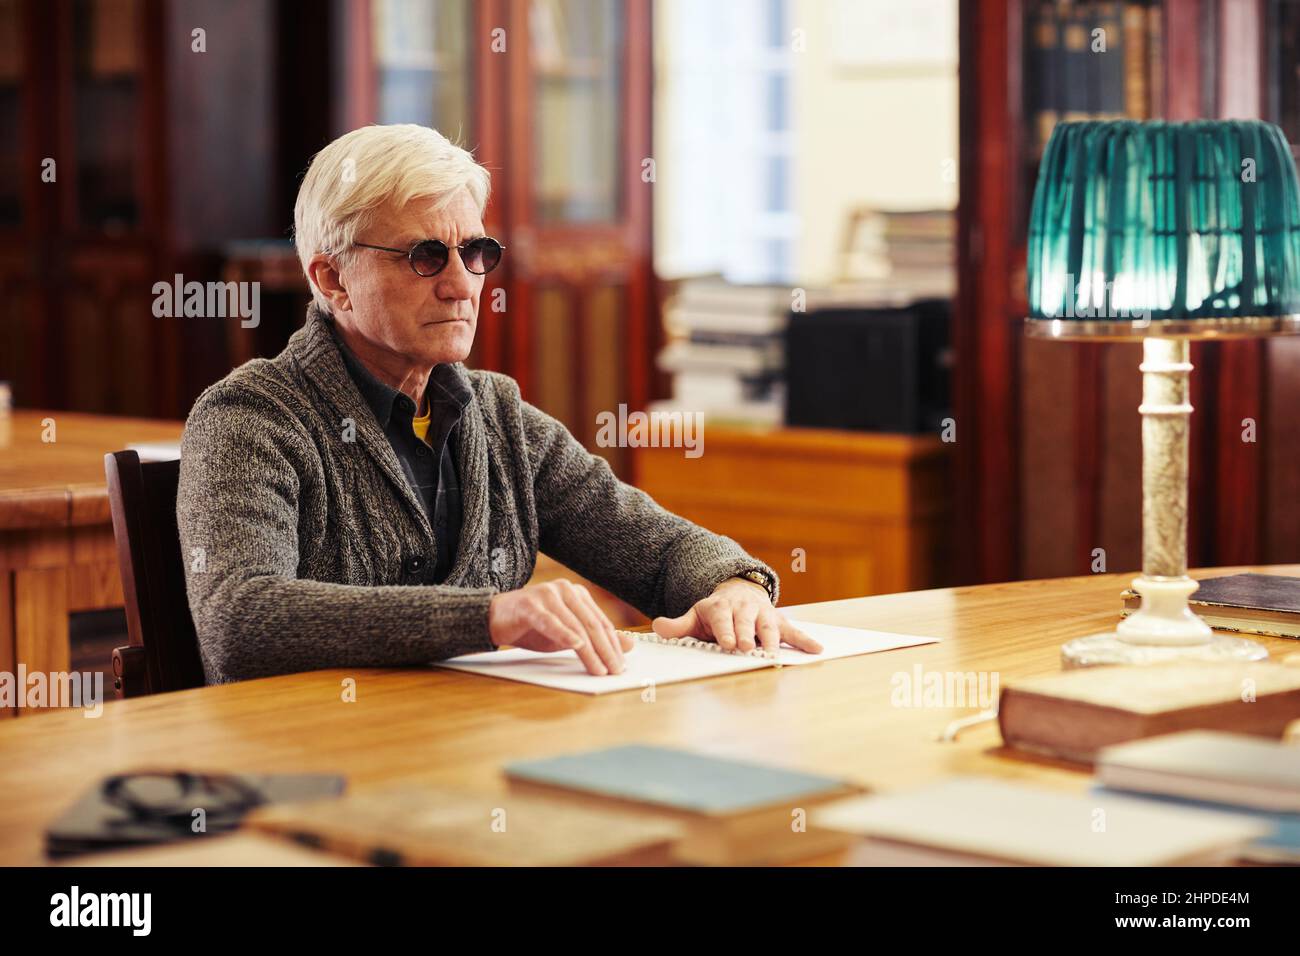 Portrait of senior man with vision impairment reading book in braille at table in classic library Stock Photo